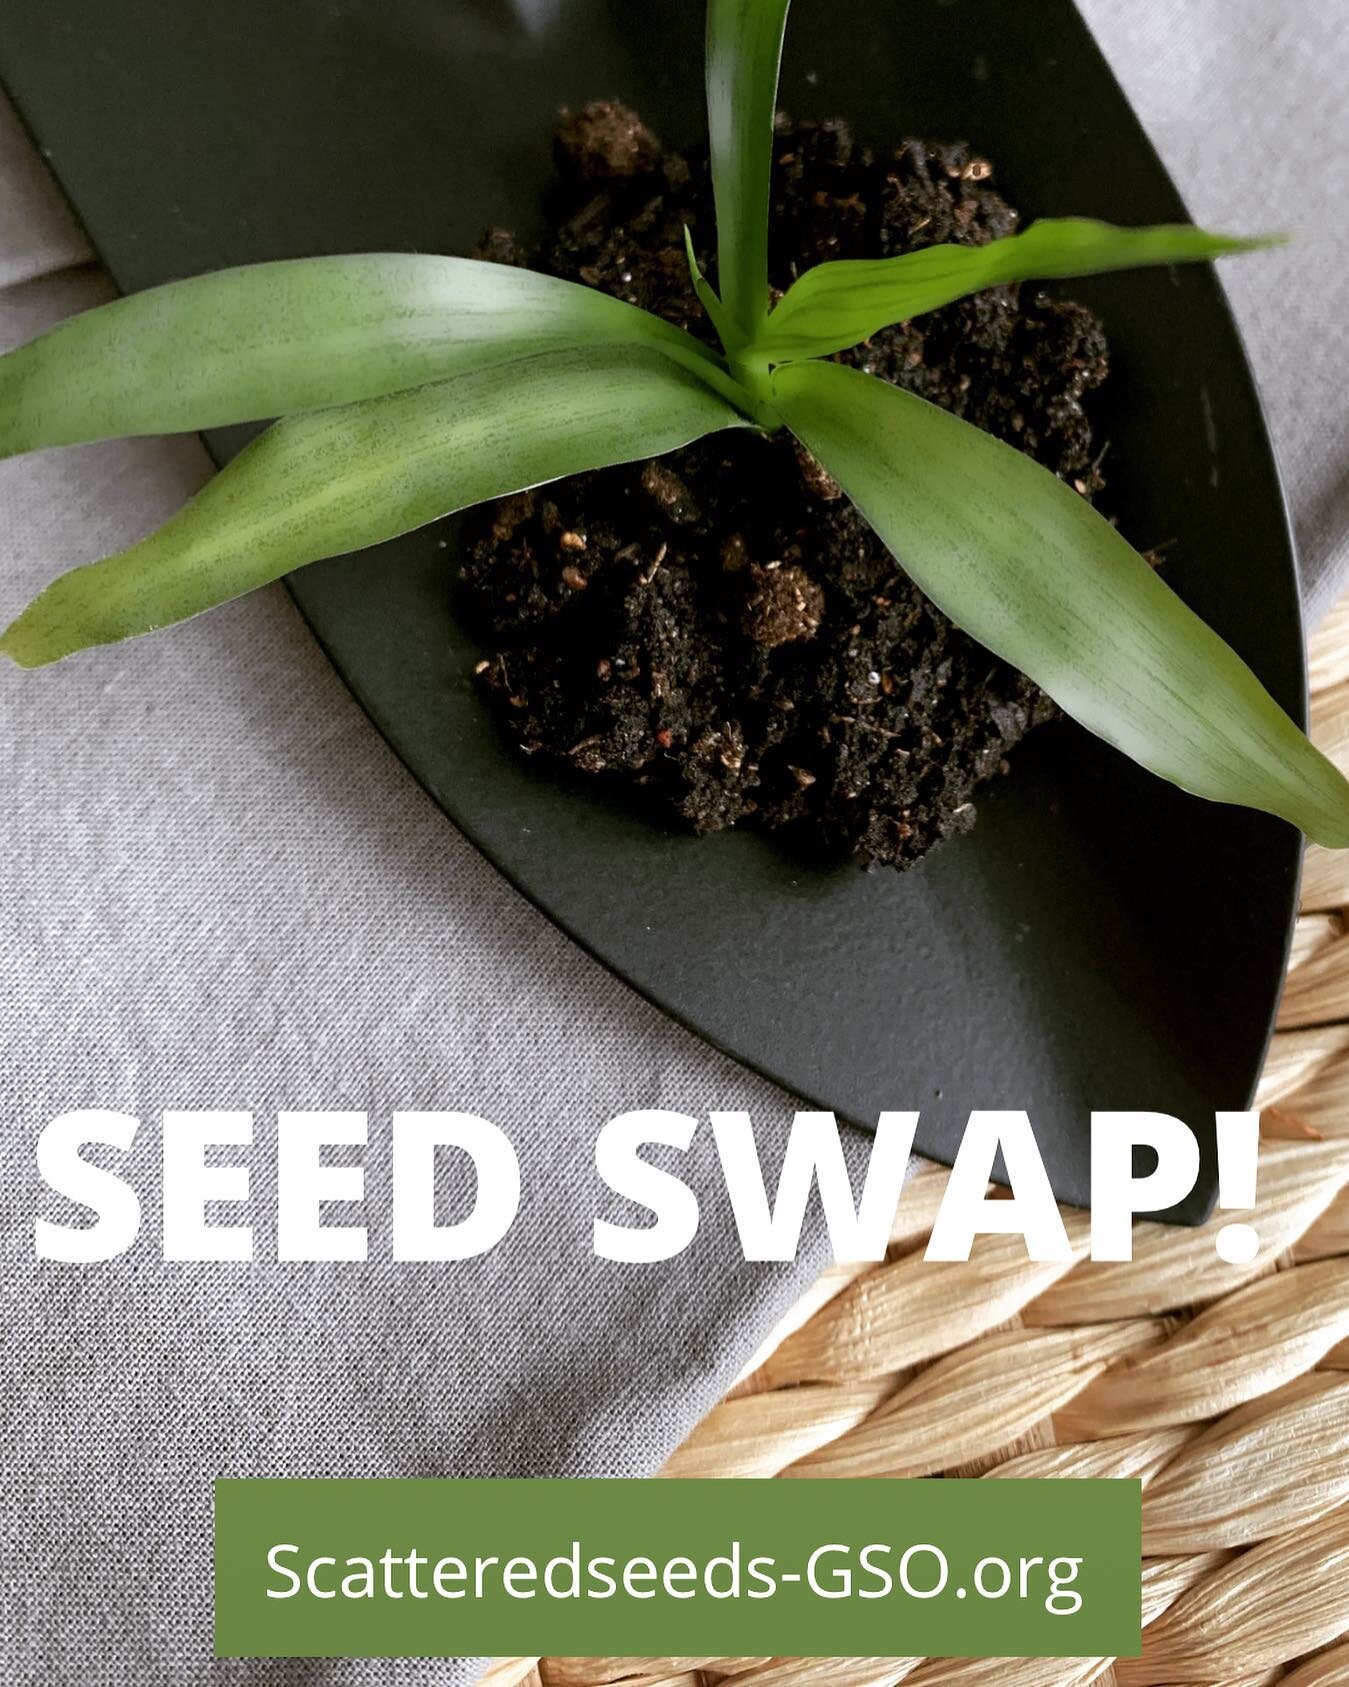 Have you heard? We&rsquo;re hosting a seed swap.

Send in 20 seeds packets, get back 20 seed packets from across the country. Who doesn&rsquo;t love getting seed mail?

Visit our website (Link in bio) and click on &ldquo;Store&rdquo; for details and 